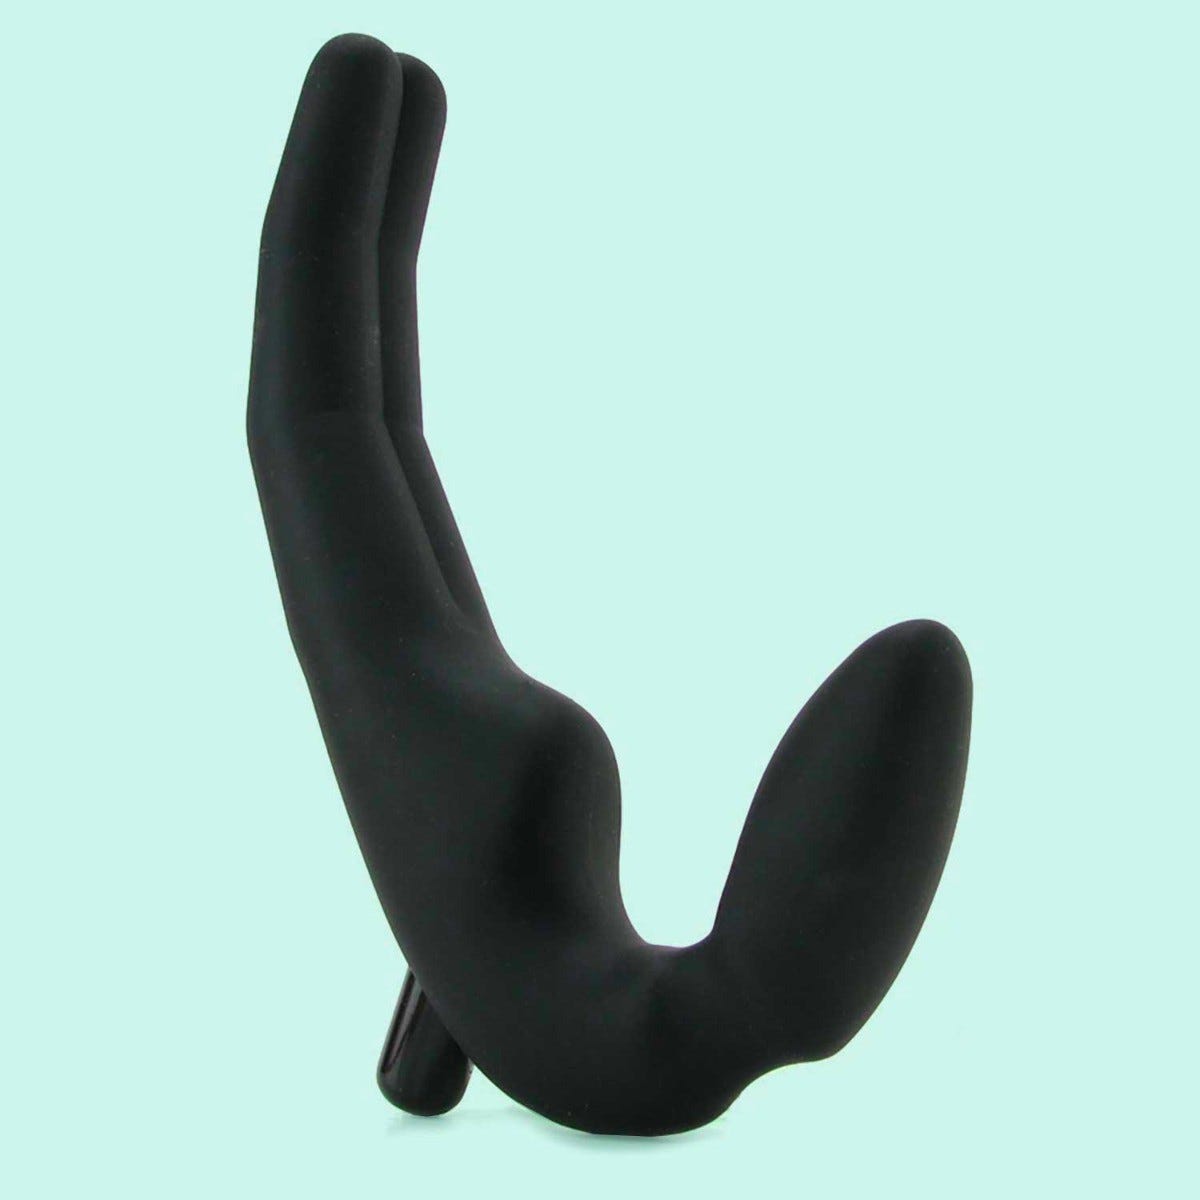 DOUBLE DILDO VIBRATING FOUR BLACK SMALL SIZE 4.7 INCH is a fun sex toy for couples from Wet For Her